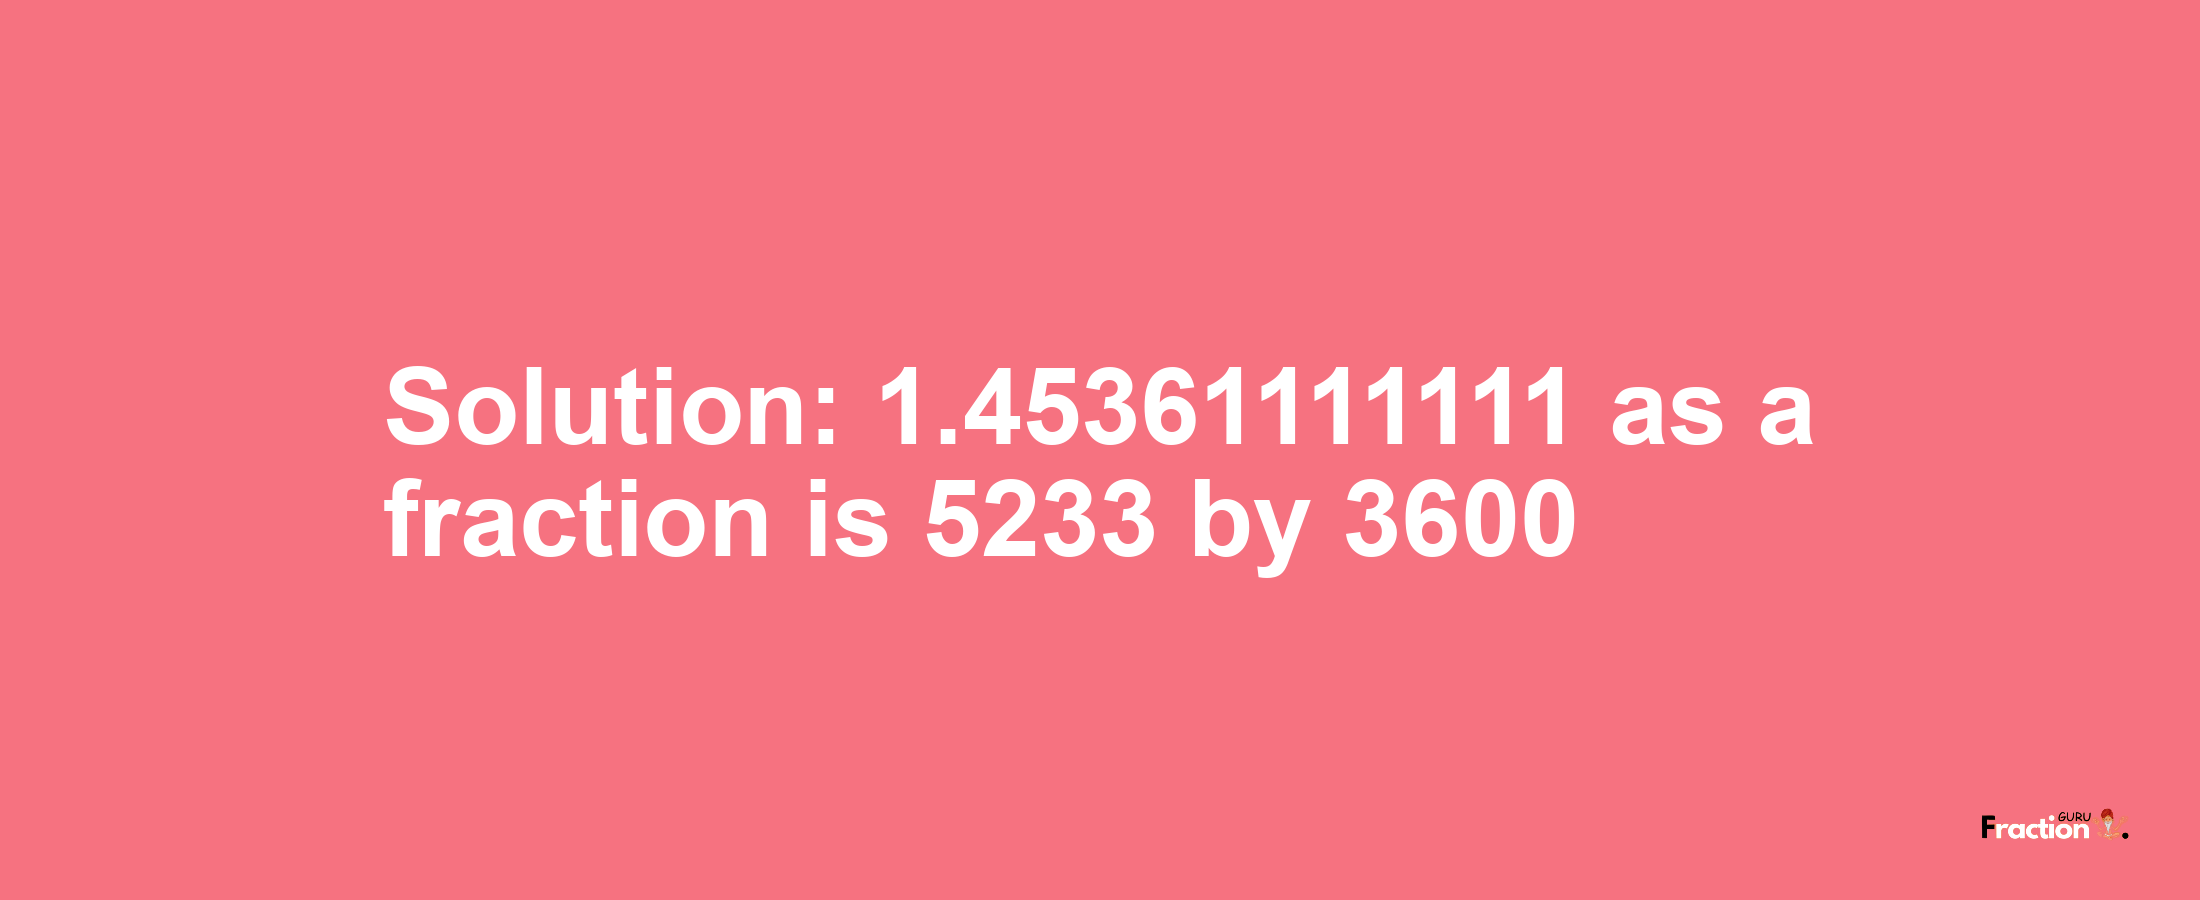 Solution:1.45361111111 as a fraction is 5233/3600